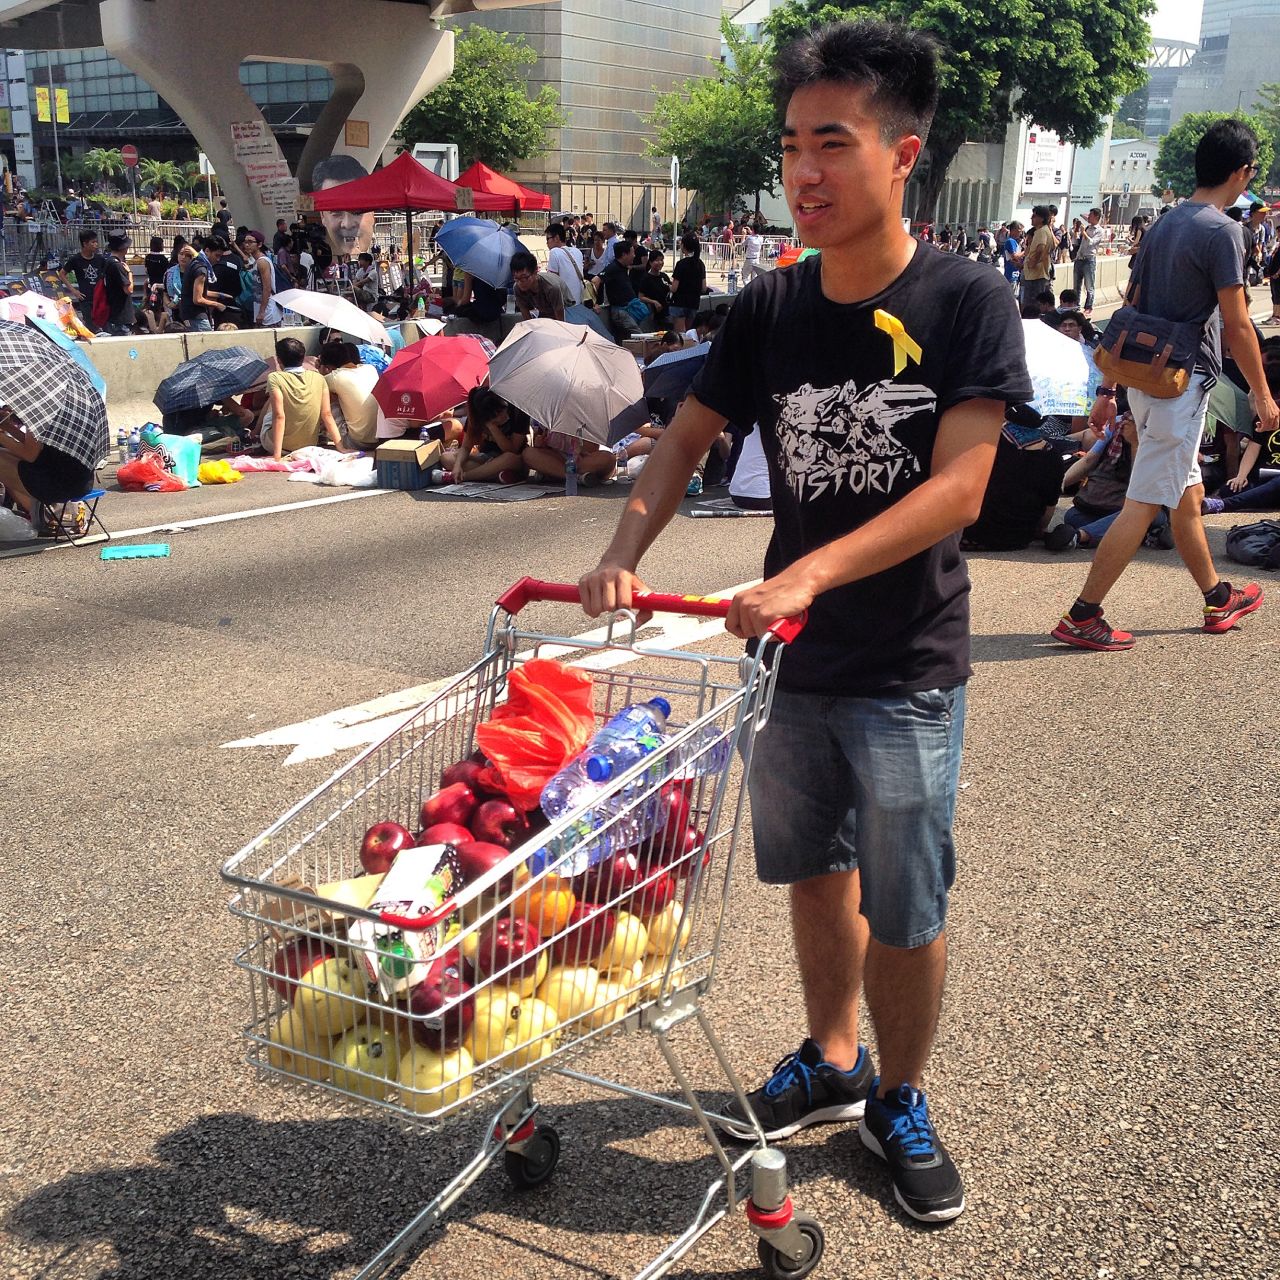 Like the city in general, Hong Kong's protest sites are clean, orderly and well-run. Volunteers bring in supplies of food and drink to distribute freely, and keep the protest site clean by gathering rubbish in piles for recycling.